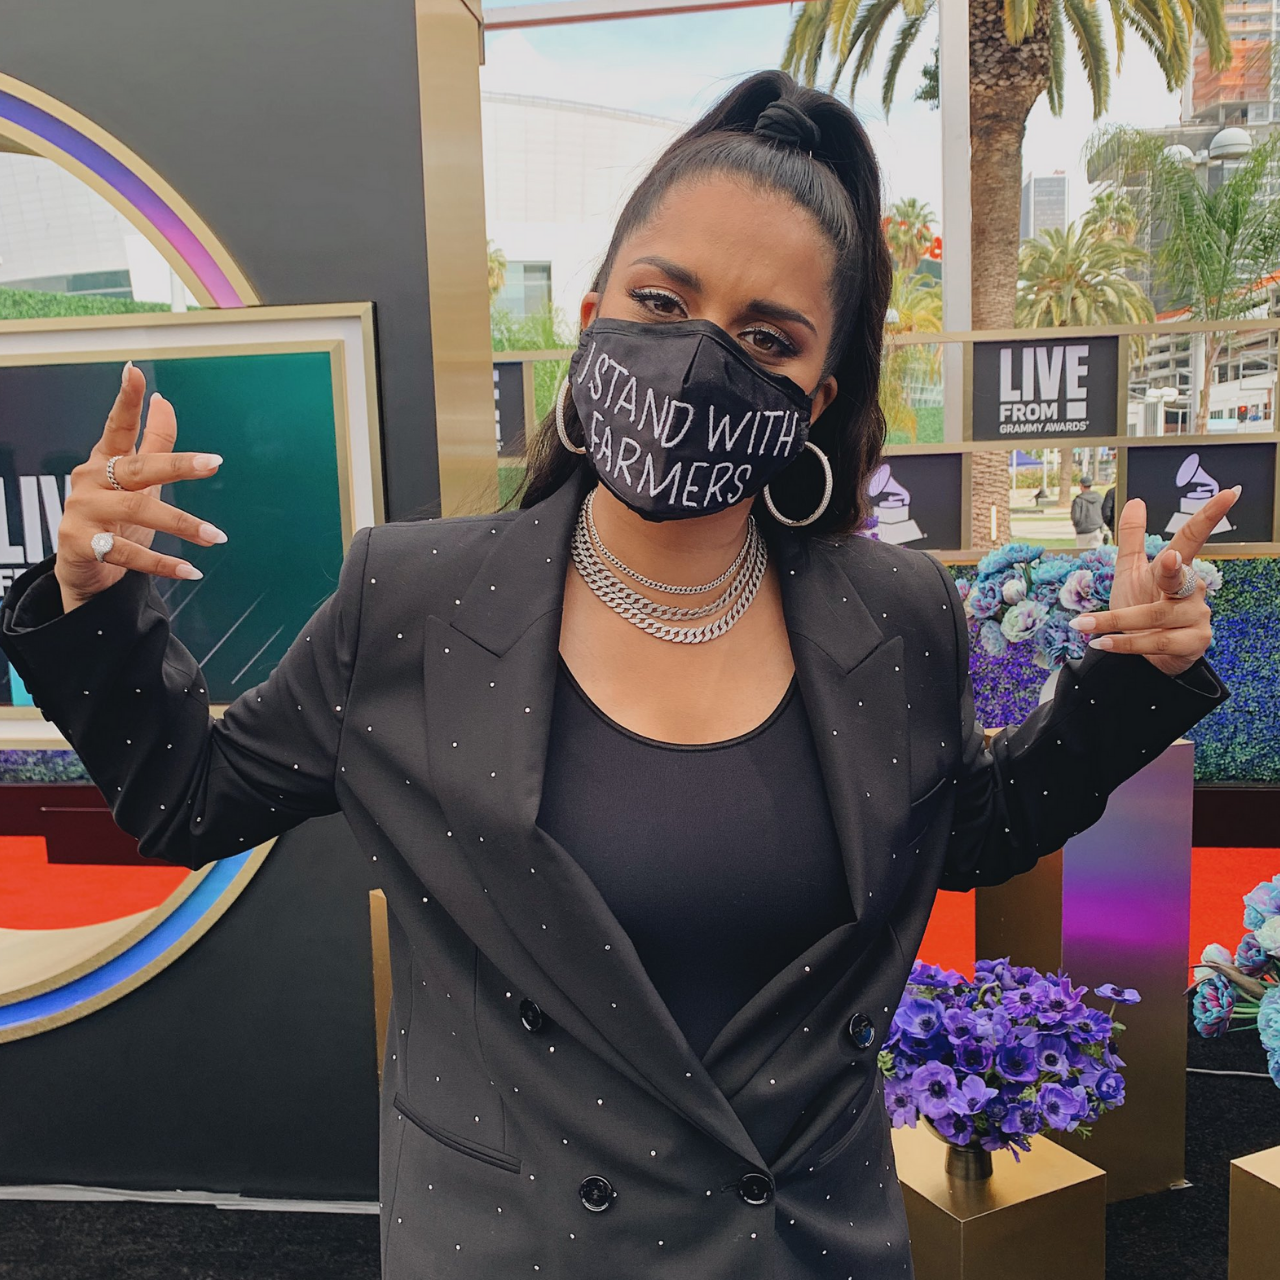 Canadian Youtuber Lilly Singh supported farmers, shared photo with "I Stand with Farmers" Face Mask